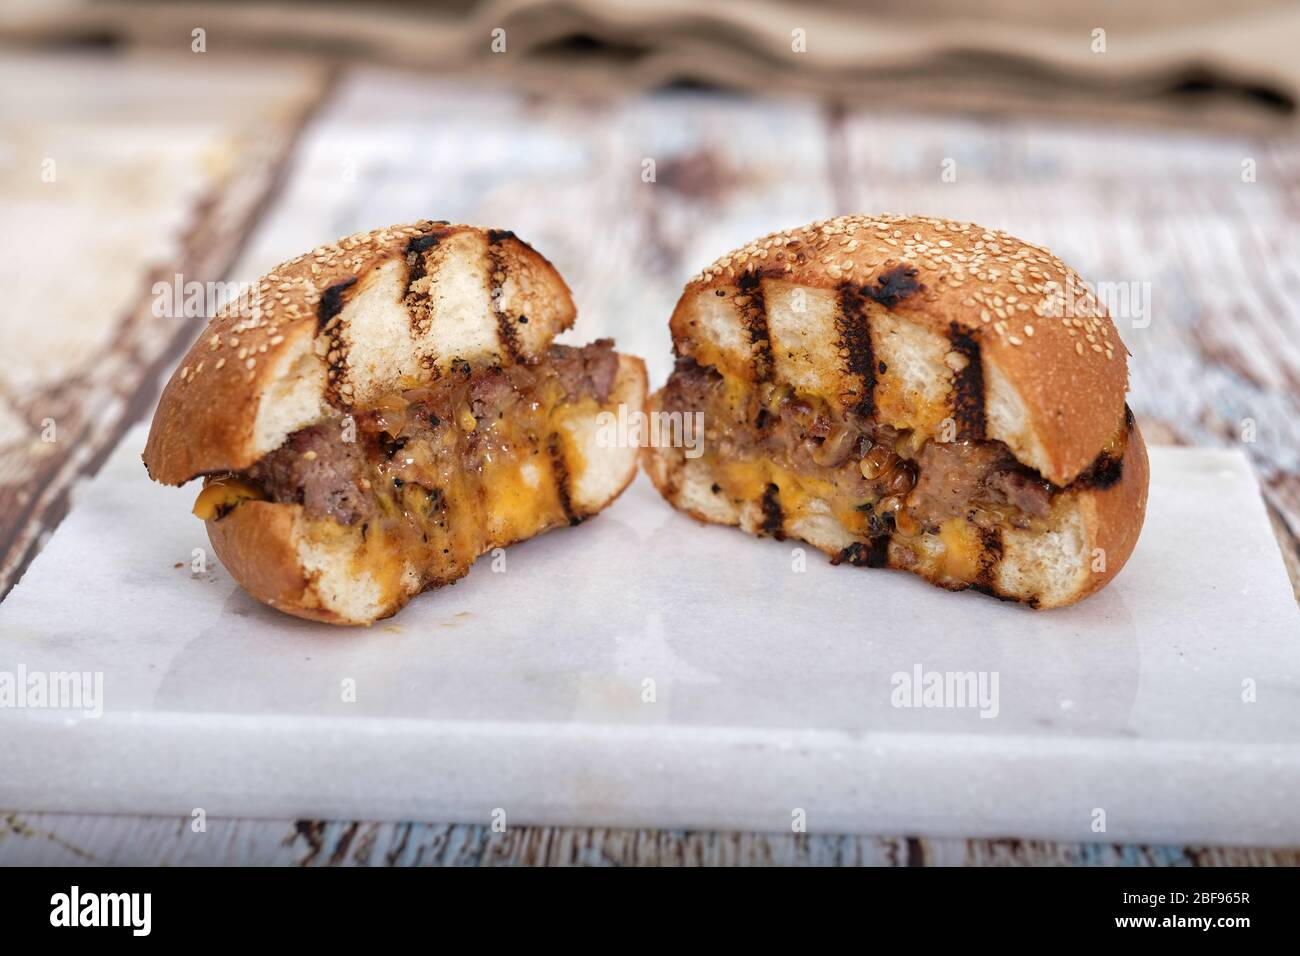 Fast Food, Hamburger. Special veal prepared hamburger, french fries and double cheddar cheese. Close-up fresh delicious tasty homemade burger. Stock Photo